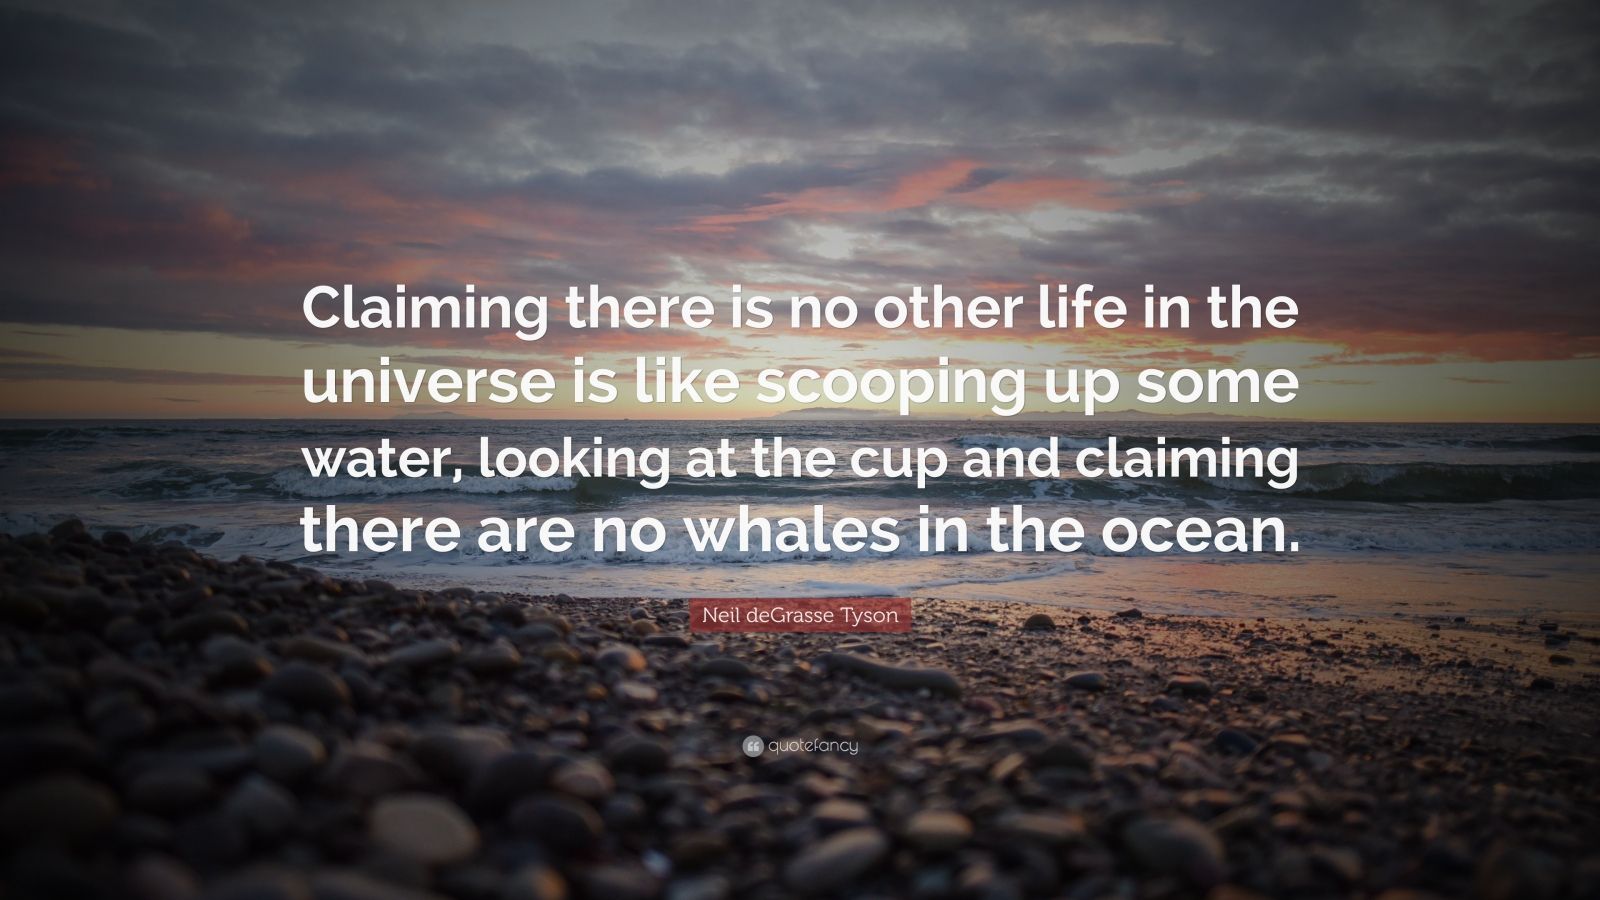 Neil deGrasse Tyson Quote: “Claiming there is no other life in the